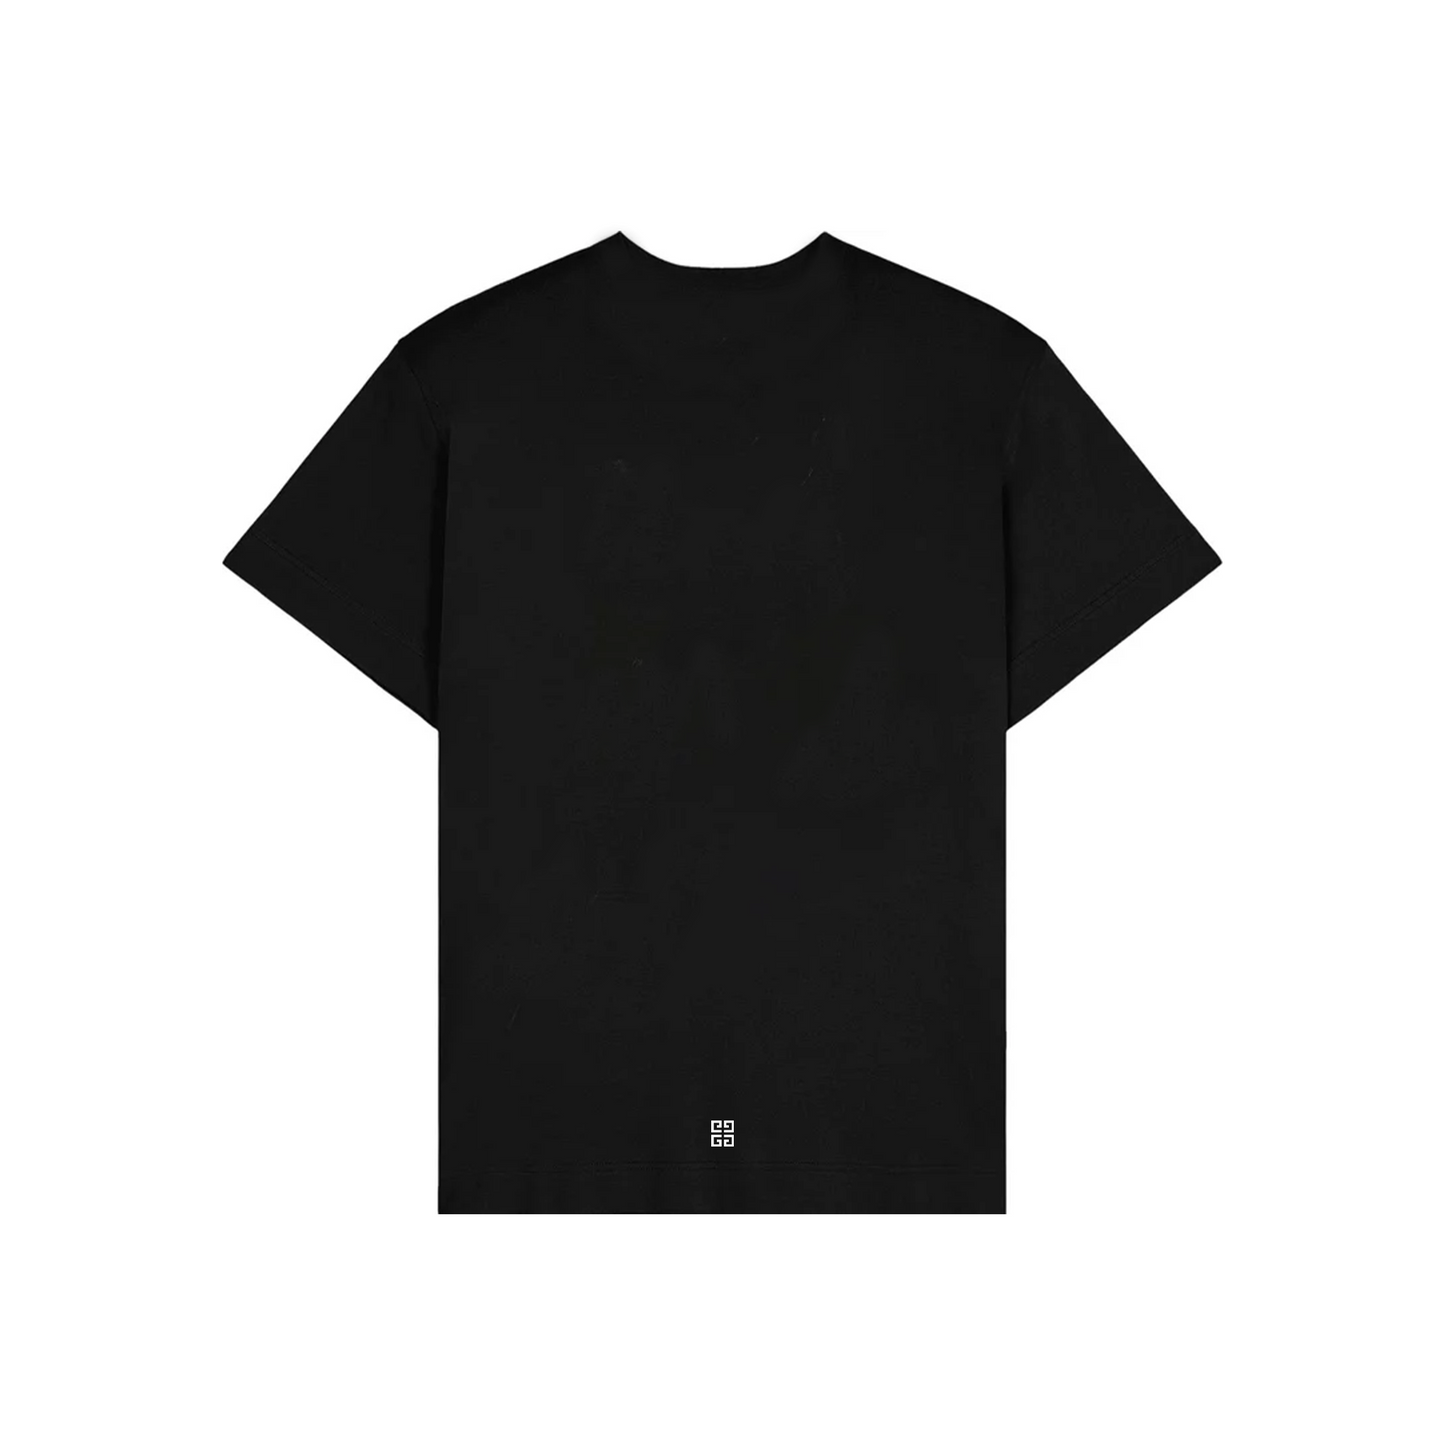 Givenchy Trompe L’Oeil Oversized Tee Black (Oversize Fit)